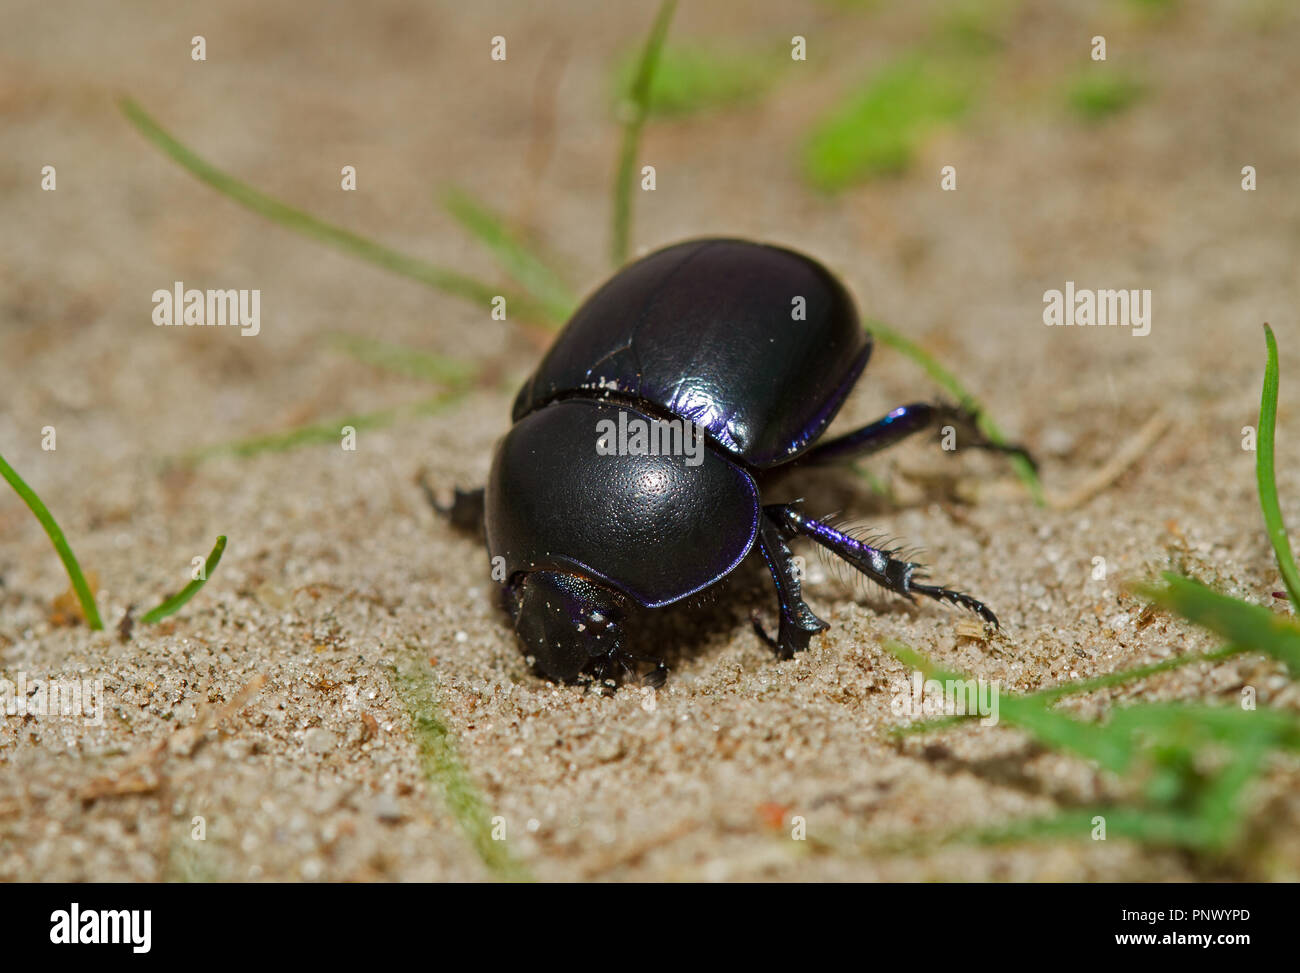 Dor, Geotrupes stercorarius, an earth-boring dung beetle, starting to dig a hole in sand Stock Photo